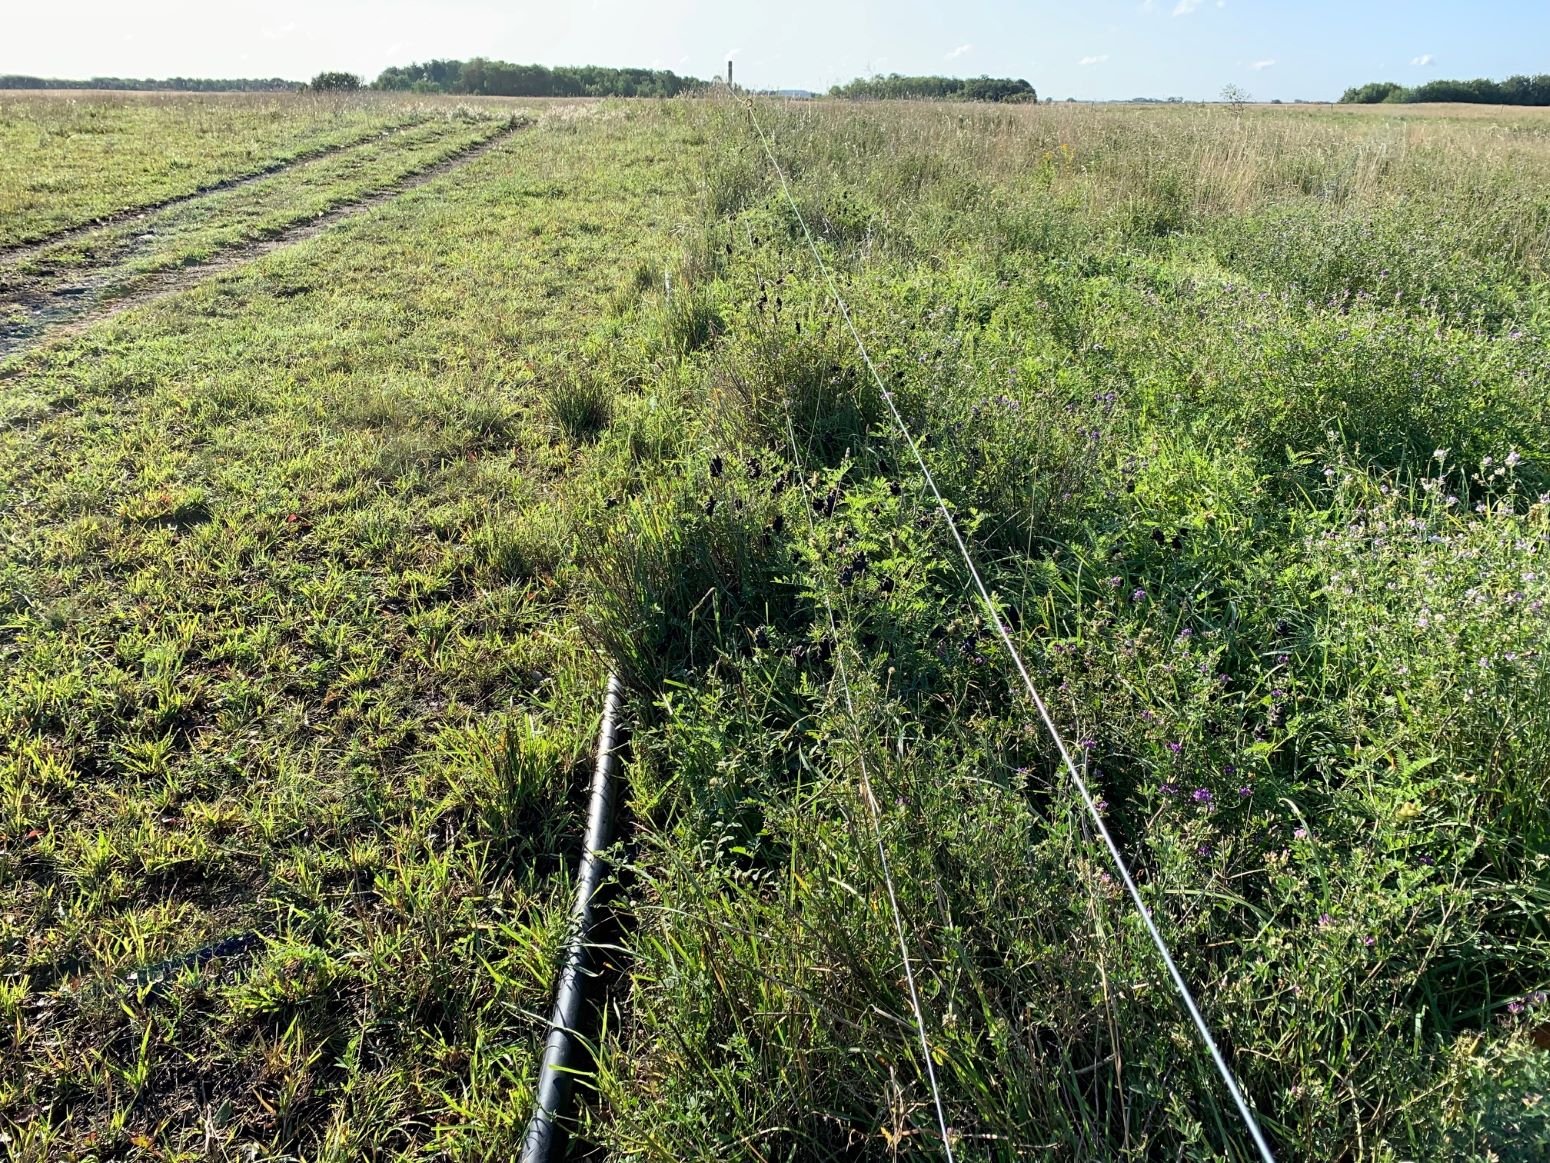 Fenceline comparison of the continuous grazing (left) and planned grazing (right) treatments